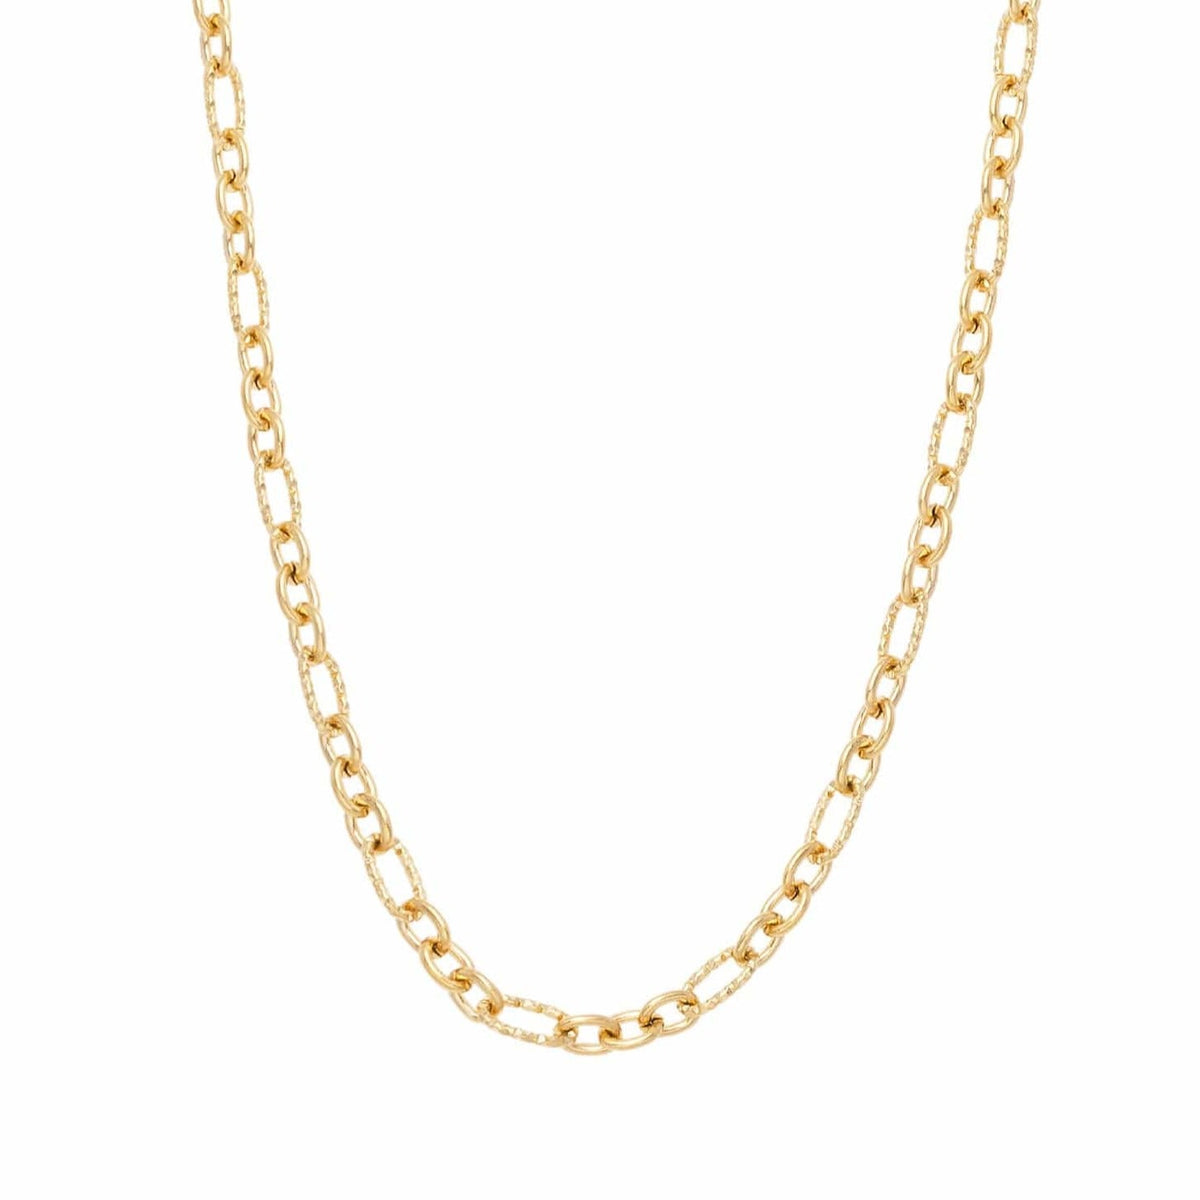 BohoMoon Stainless Steel Nellie Necklace Gold